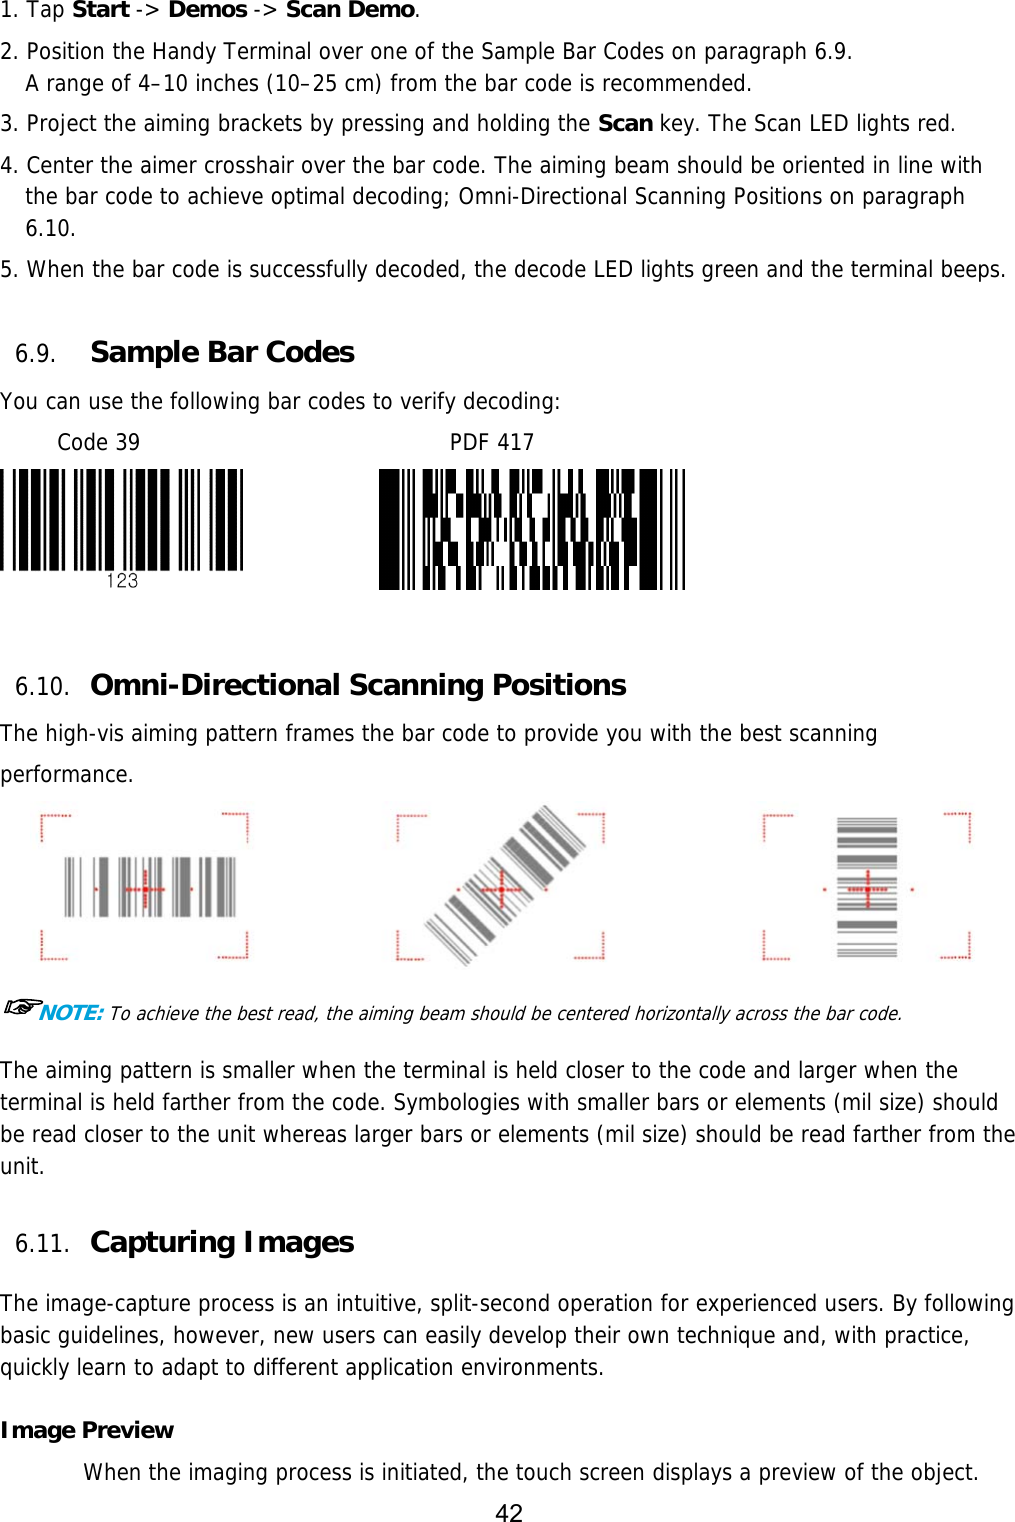 42  1. Tap Start -&gt; Demos -&gt; Scan Demo. 2. Position the Handy Terminal over one of the Sample Bar Codes on paragraph 6.9. A range of 4–10 inches (10–25 cm) from the bar code is recommended.  3. Project the aiming brackets by pressing and holding the Scan key. The Scan LED lights red. 4. Center the aimer crosshair over the bar code. The aiming beam should be oriented in line with the bar code to achieve optimal decoding; Omni-Directional Scanning Positions on paragraph 6.10.  5. When the bar code is successfully decoded, the decode LED lights green and the terminal beeps.  6.9. Sample Bar Codes You can use the following bar codes to verify decoding: Code 39                           PDF 417               6.10. Omni-Directional Scanning Positions The high-vis aiming pattern frames the bar code to provide you with the best scanning performance.  ☞NOTE: To achieve the best read, the aiming beam should be centered horizontally across the bar code. The aiming pattern is smaller when the terminal is held closer to the code and larger when the terminal is held farther from the code. Symbologies with smaller bars or elements (mil size) should be read closer to the unit whereas larger bars or elements (mil size) should be read farther from the unit.  6.11. Capturing Images    The image-capture process is an intuitive, split-second operation for experienced users. By following basic guidelines, however, new users can easily develop their own technique and, with practice, quickly learn to adapt to different application environments.  Image Preview When the imaging process is initiated, the touch screen displays a preview of the object. 